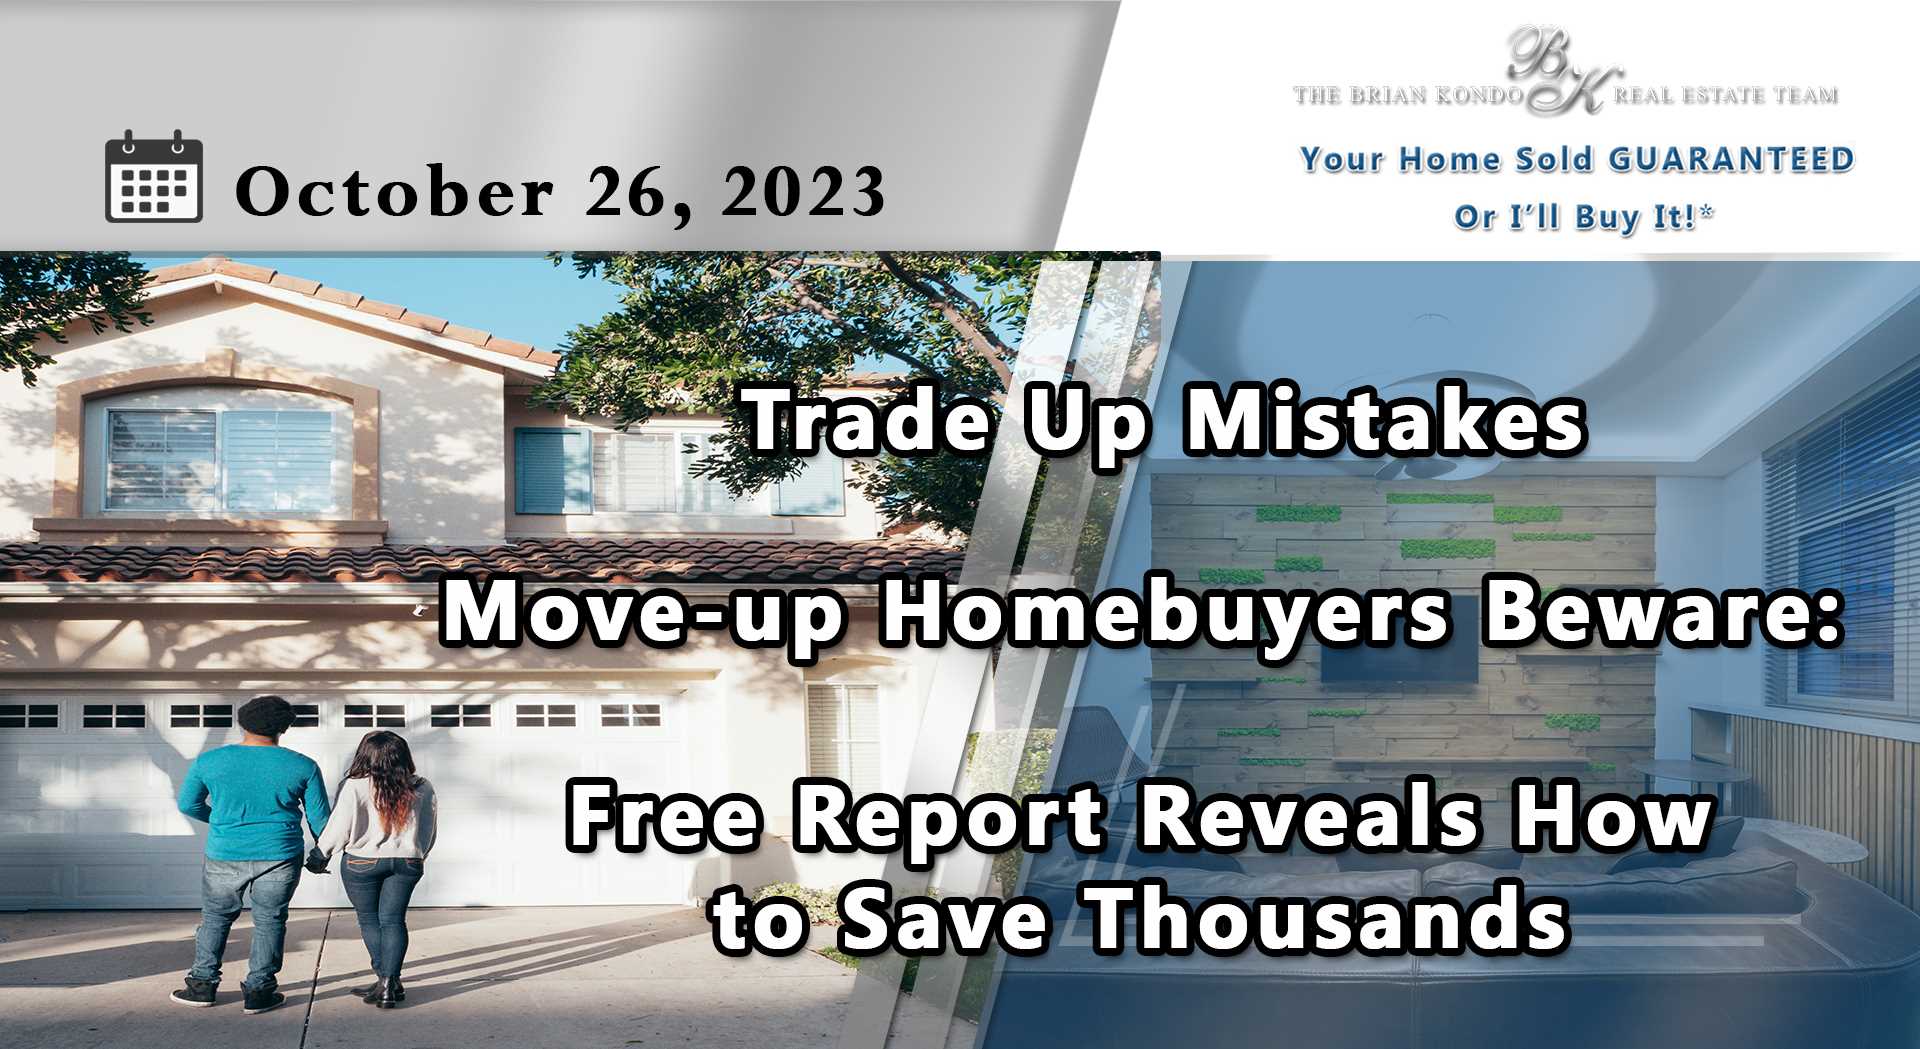 Move-up Homebuyers Beware: Free Report Reveals How to Save Thousands